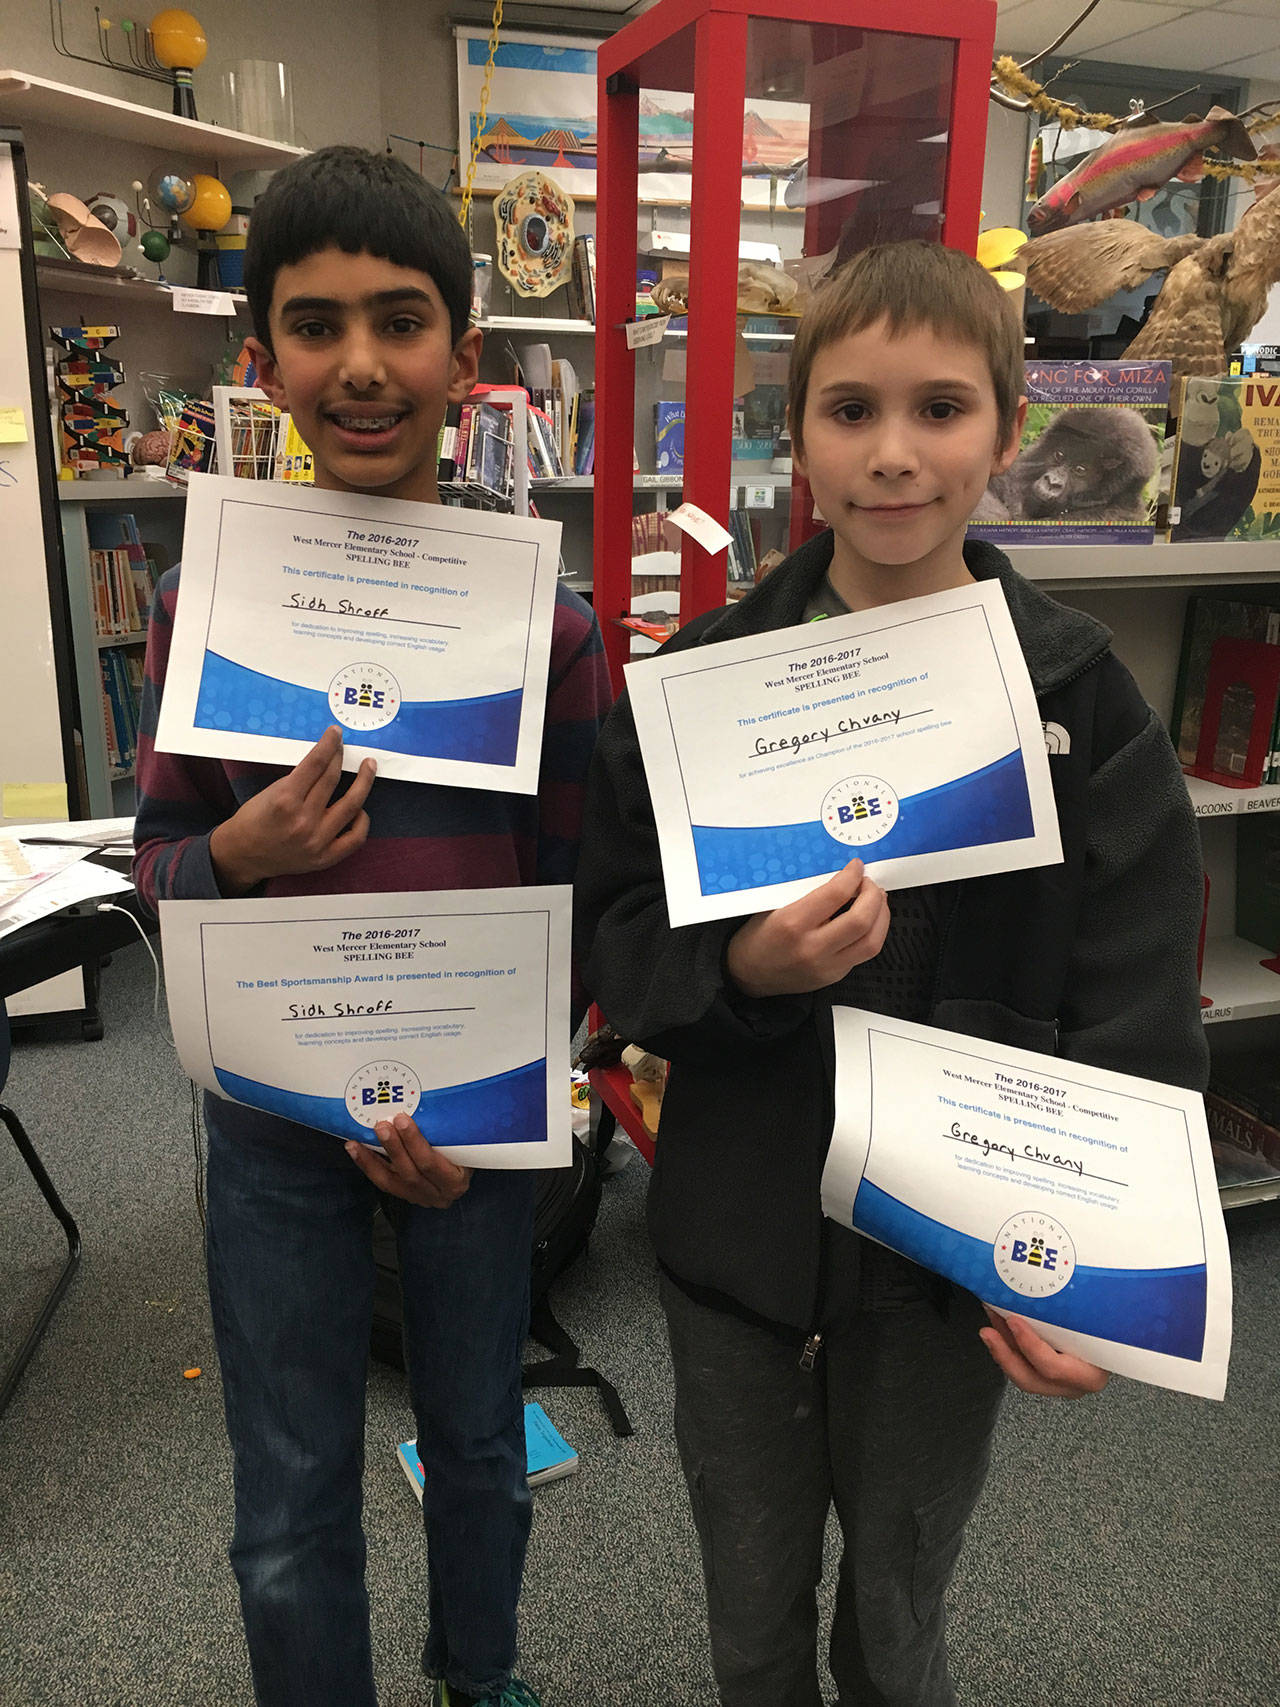 West Mercer Elementary students Sidh Shroff (left) and Gregory Chvany. Photo courtesy of Dalia Silverstein